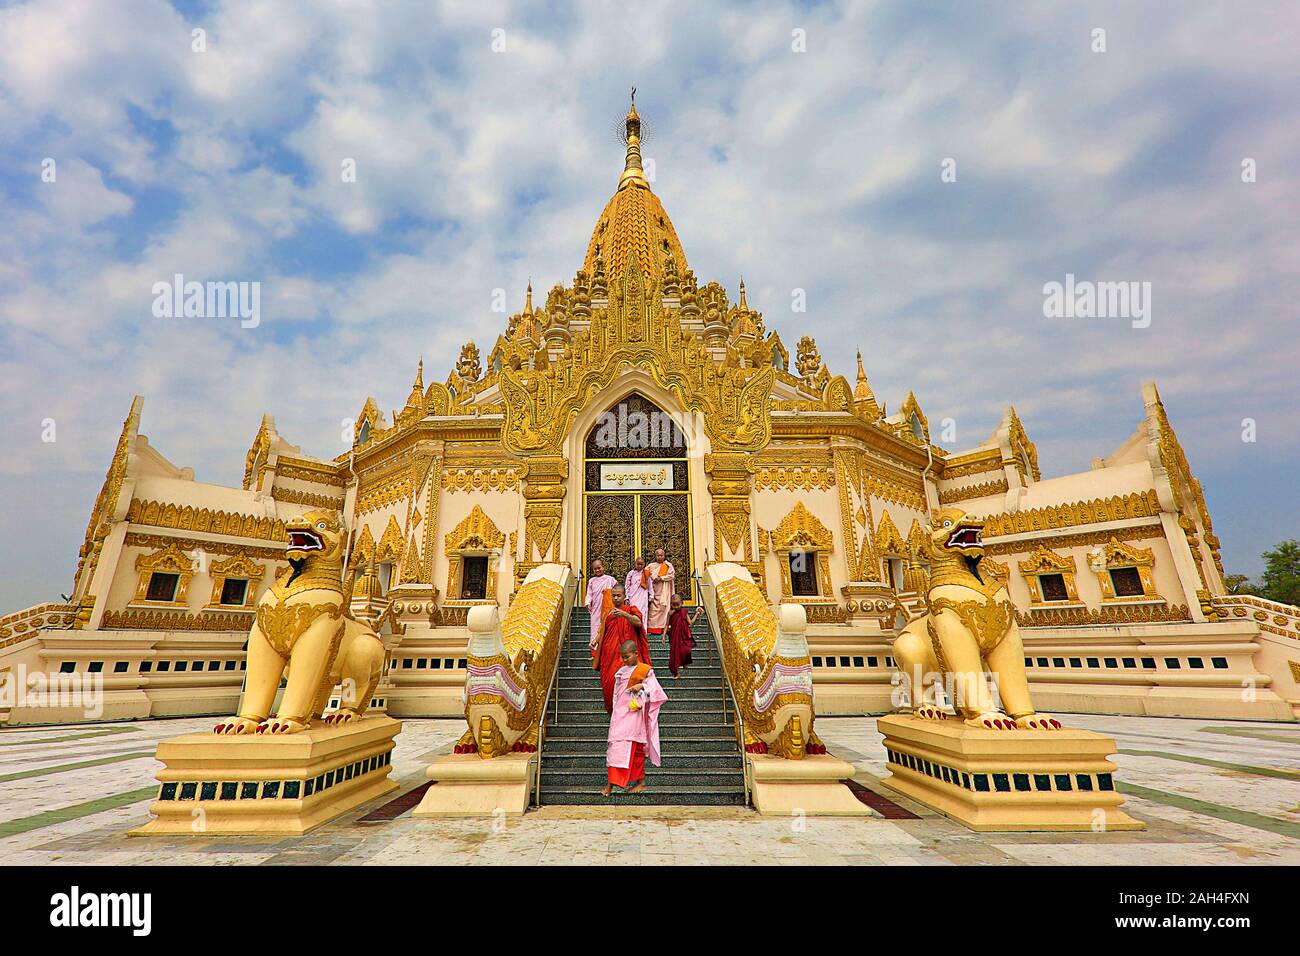 Nuns and monks on the steps of Buddha Tooth Relic Pagoda known as Swe Taw Myat, in Yangon, Myanmar Stock Photo